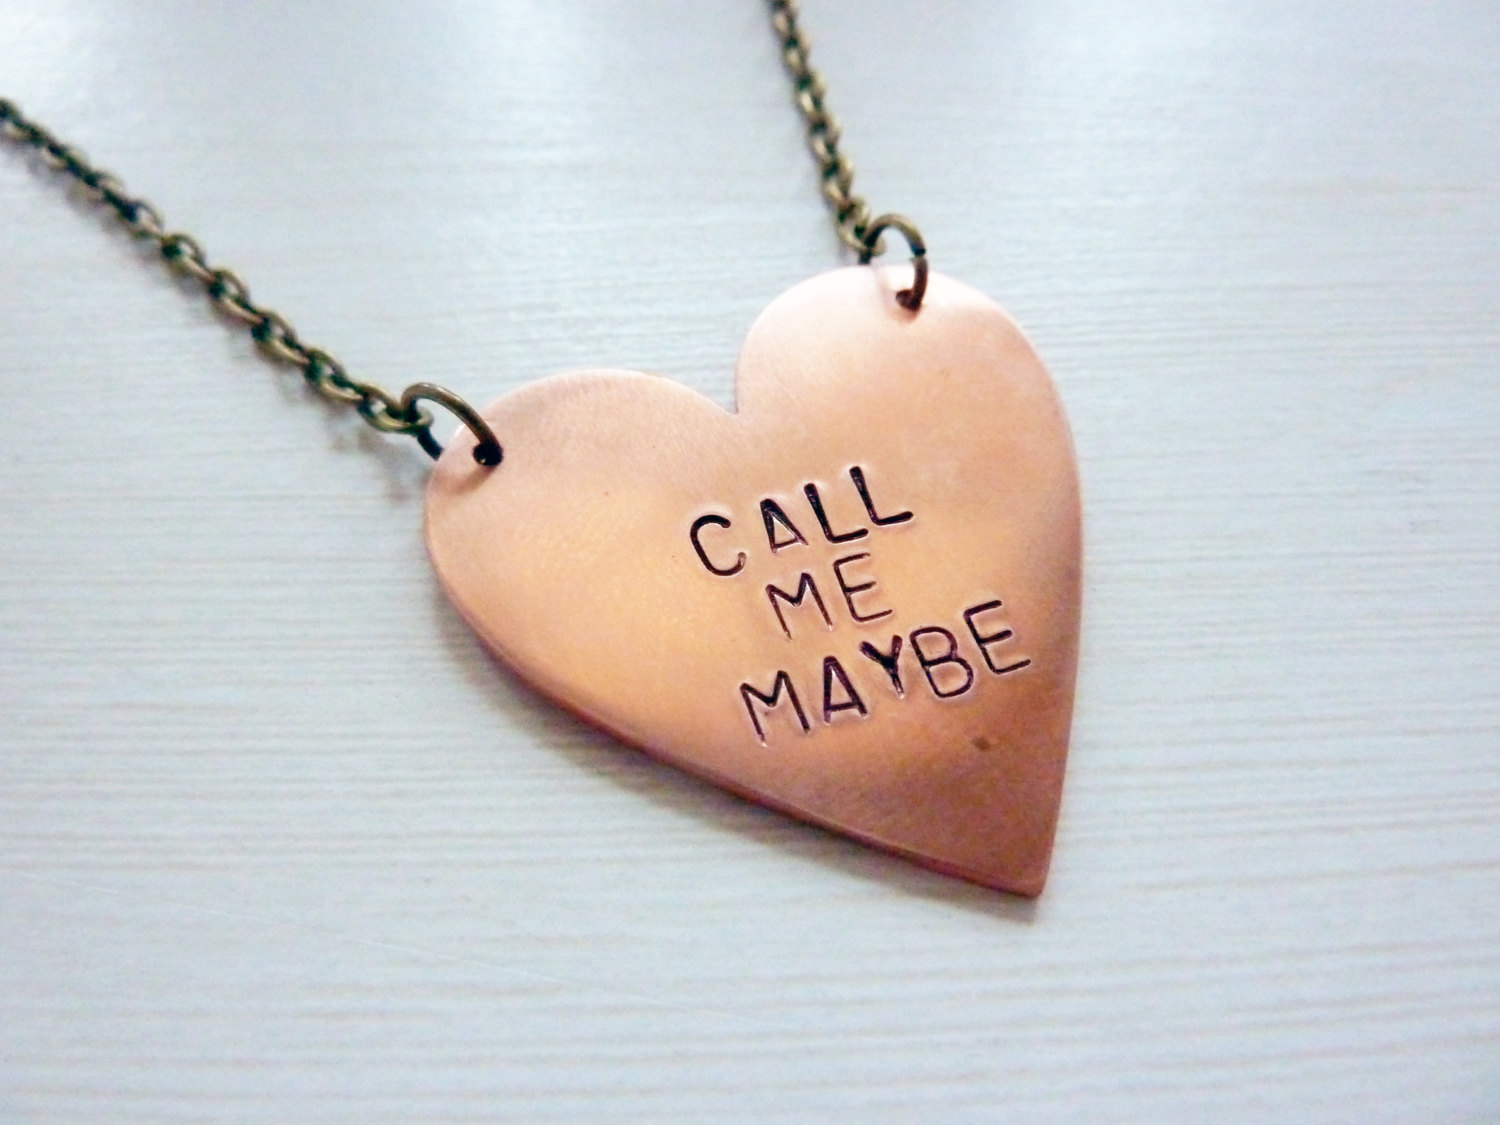 call me maybe necklace